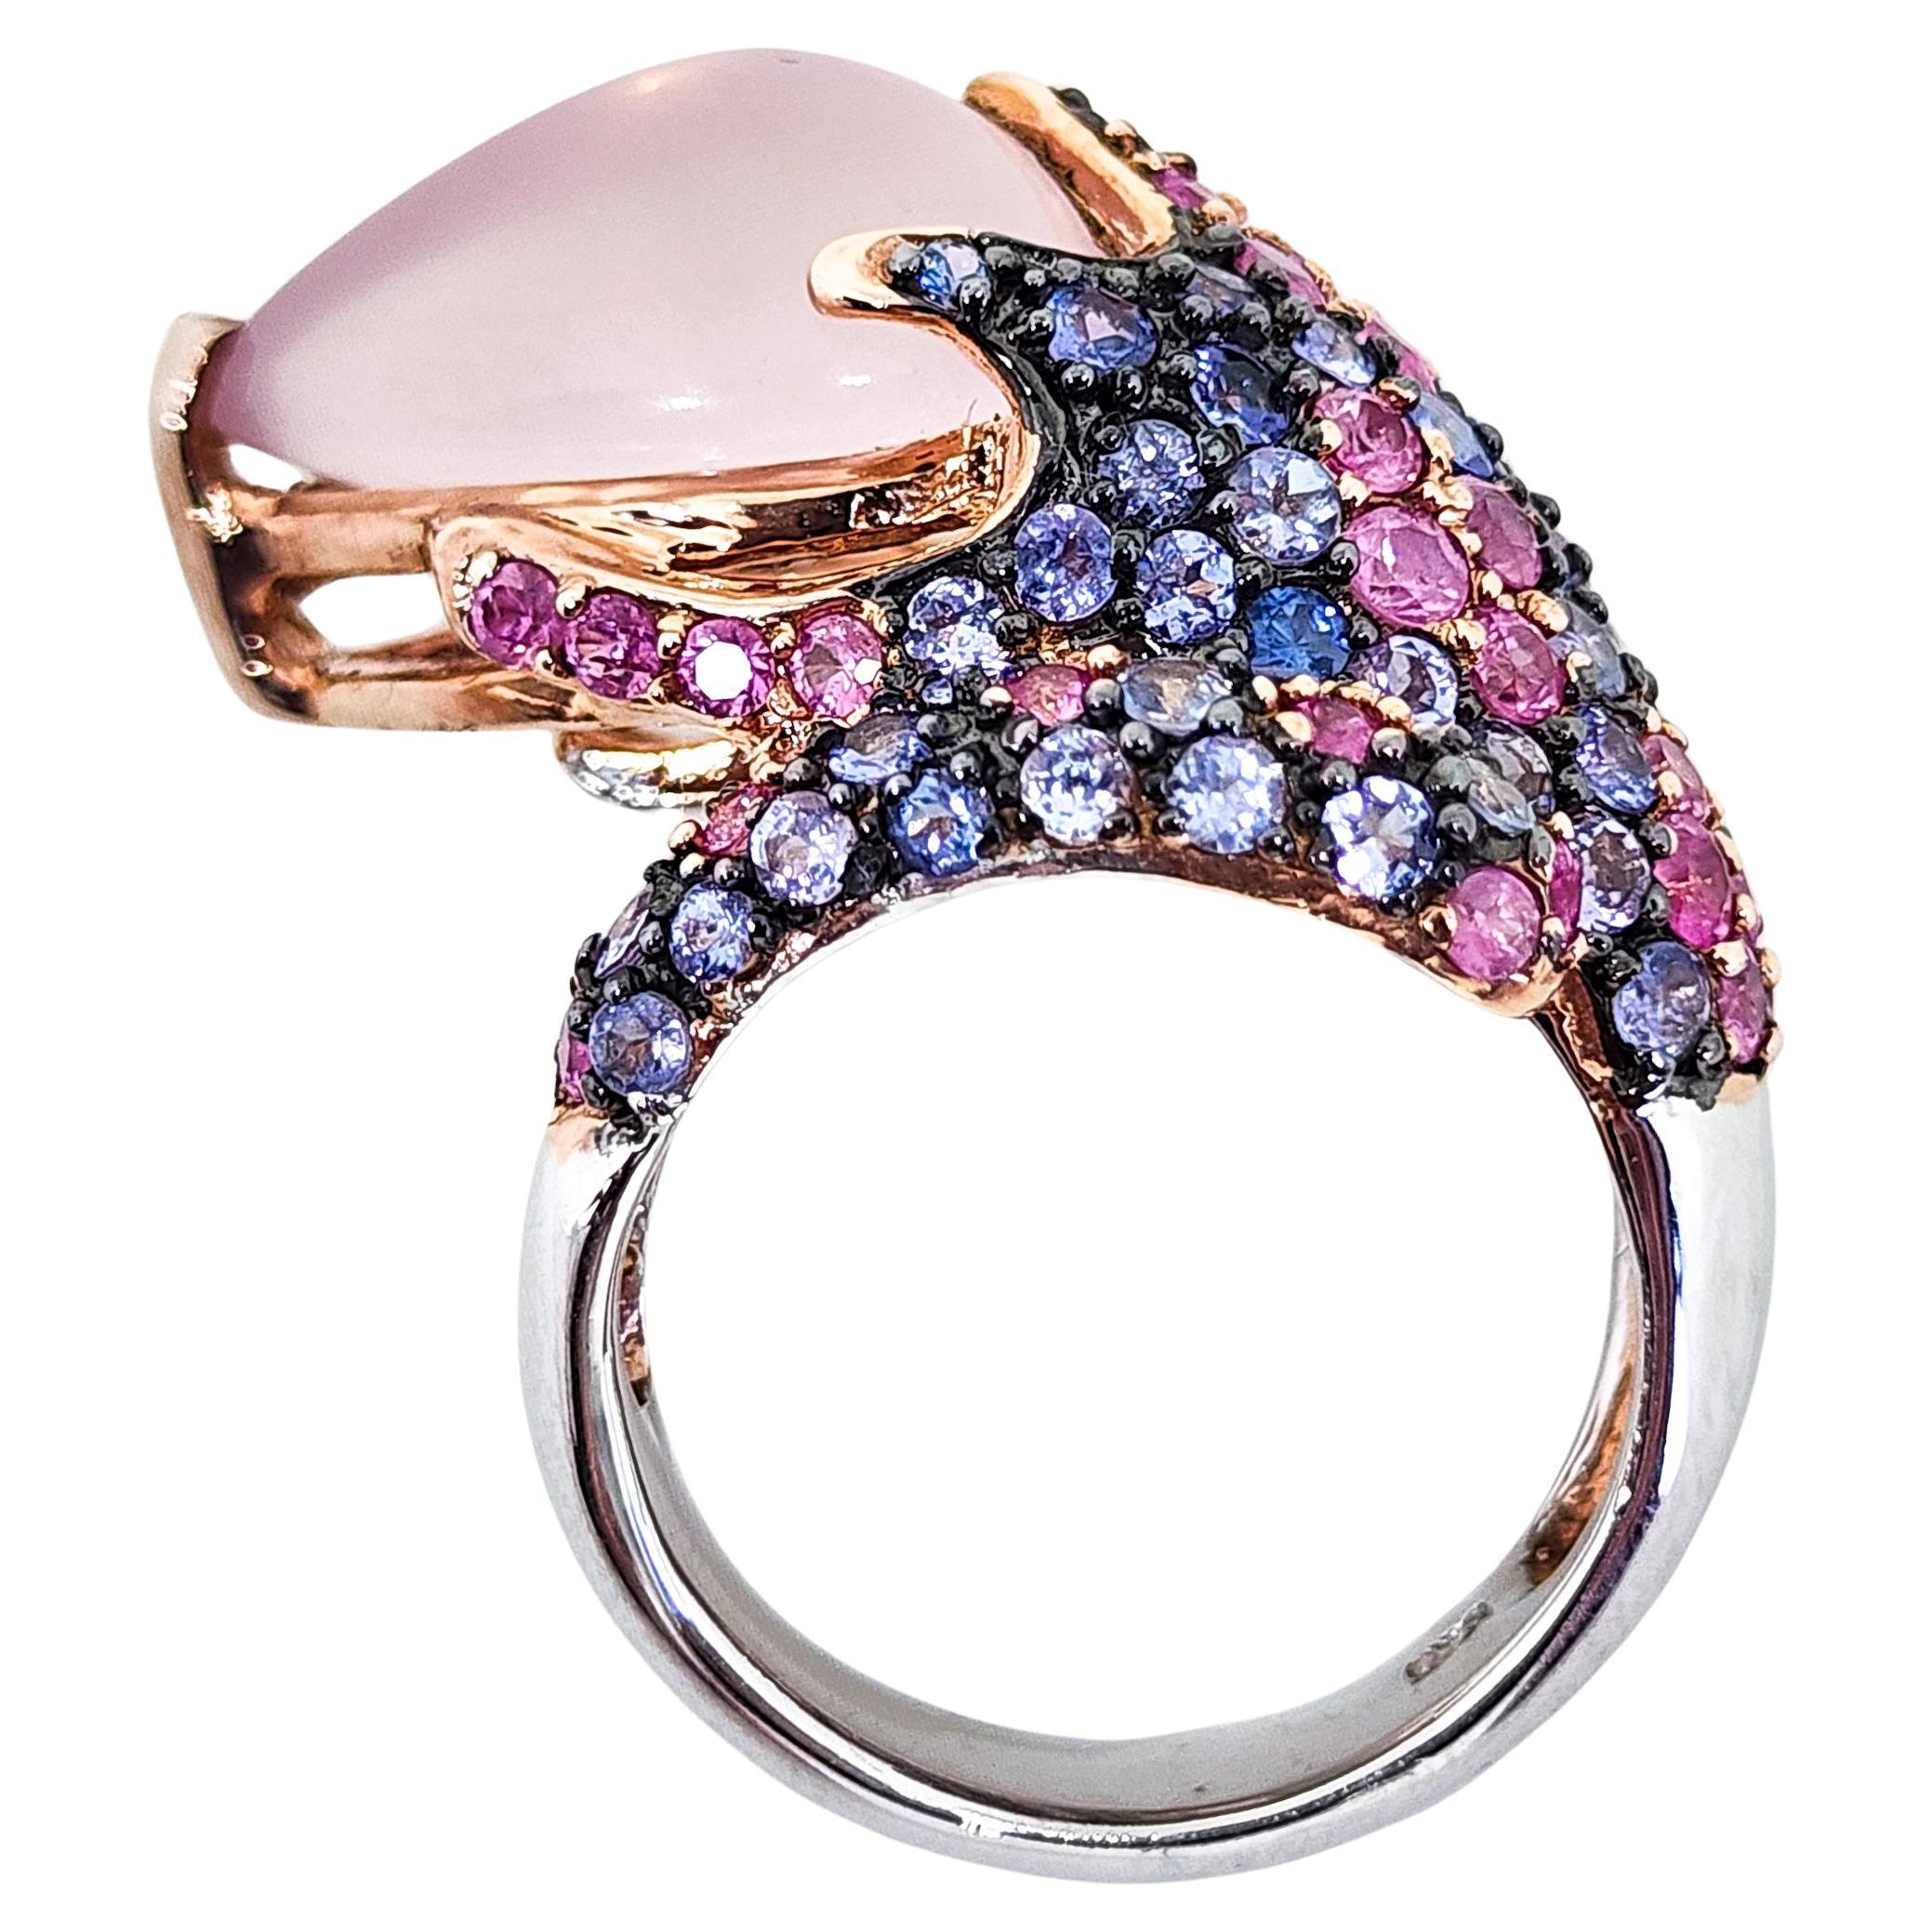 Contemporary 13.85cts Candy Ombre Color Bypass Ring Pink Blue Purple Sapphire and Rose Quartz